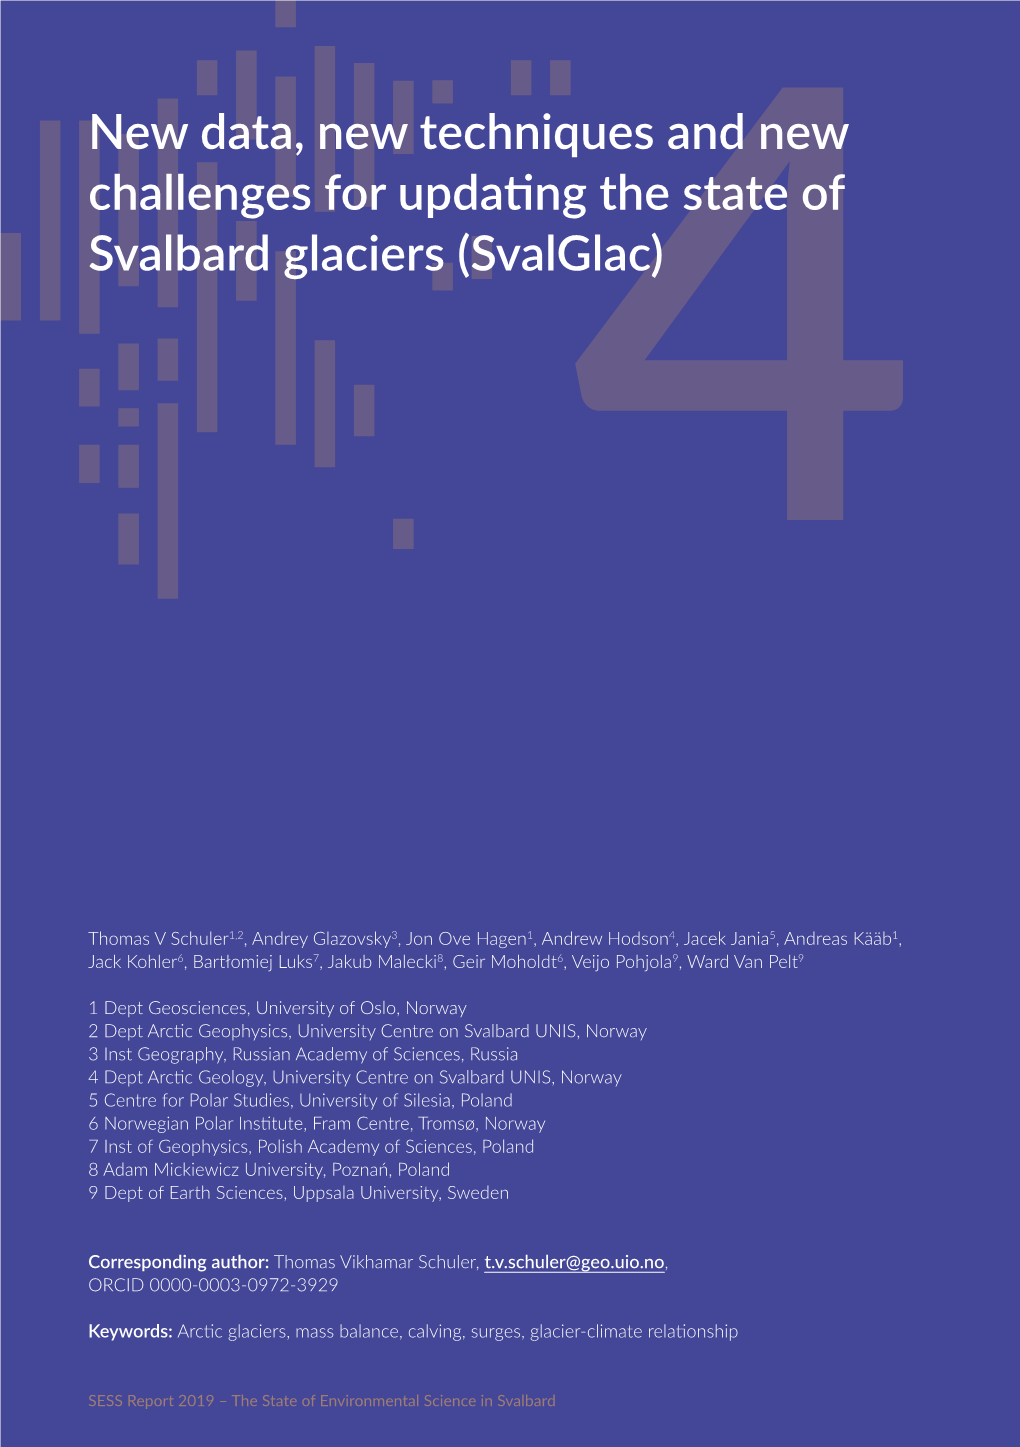 New Data, New Techniques and New Challenges for Updating the State of Svalbard Glaciers (Svalglac)4